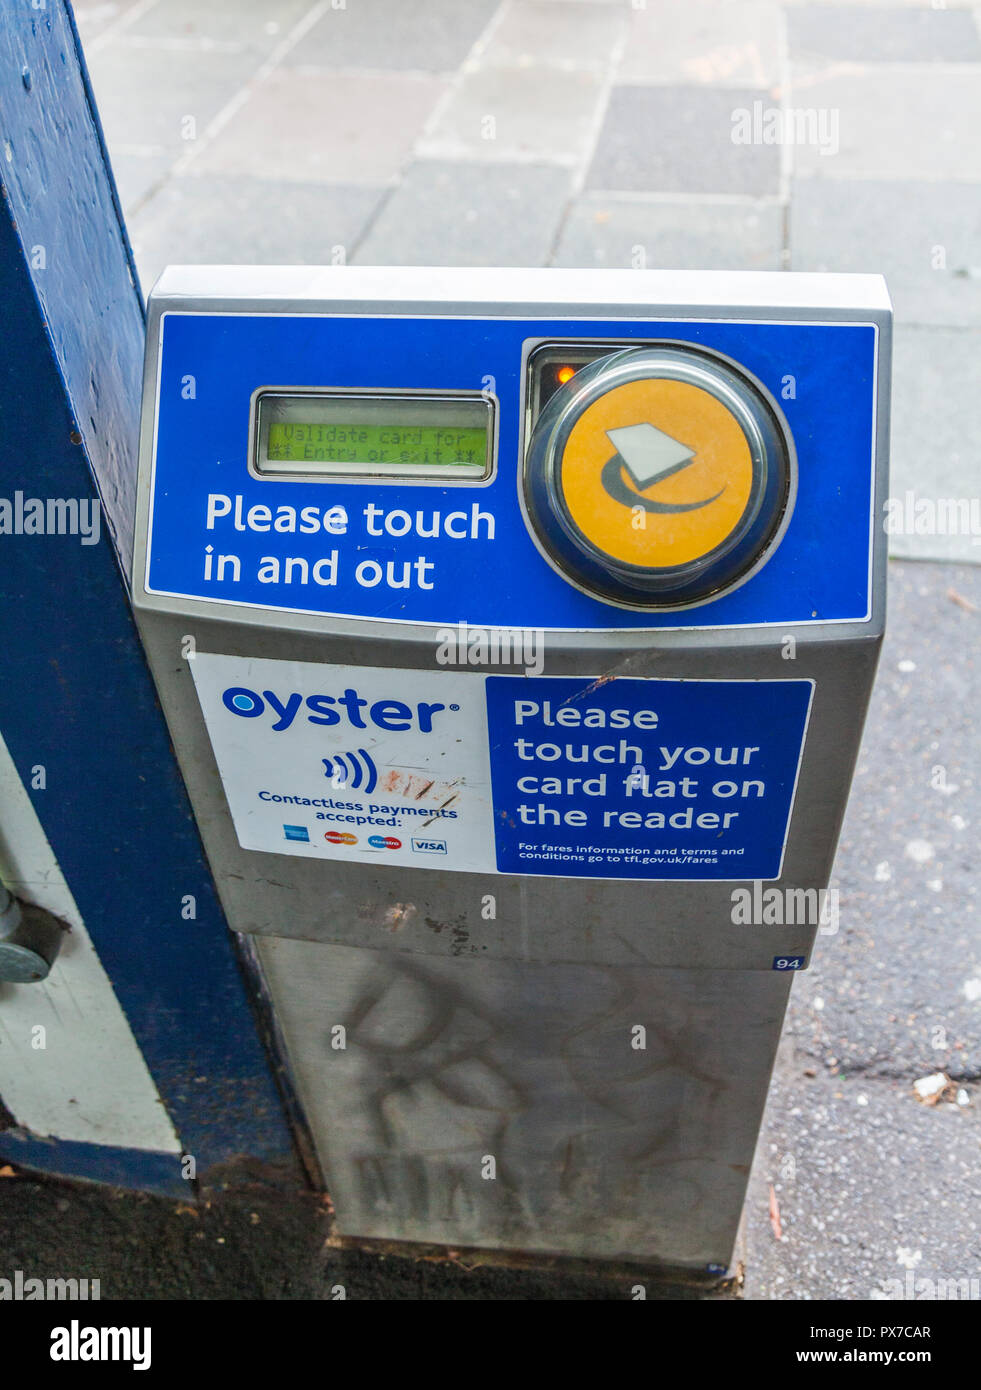 oyster card beep sound download